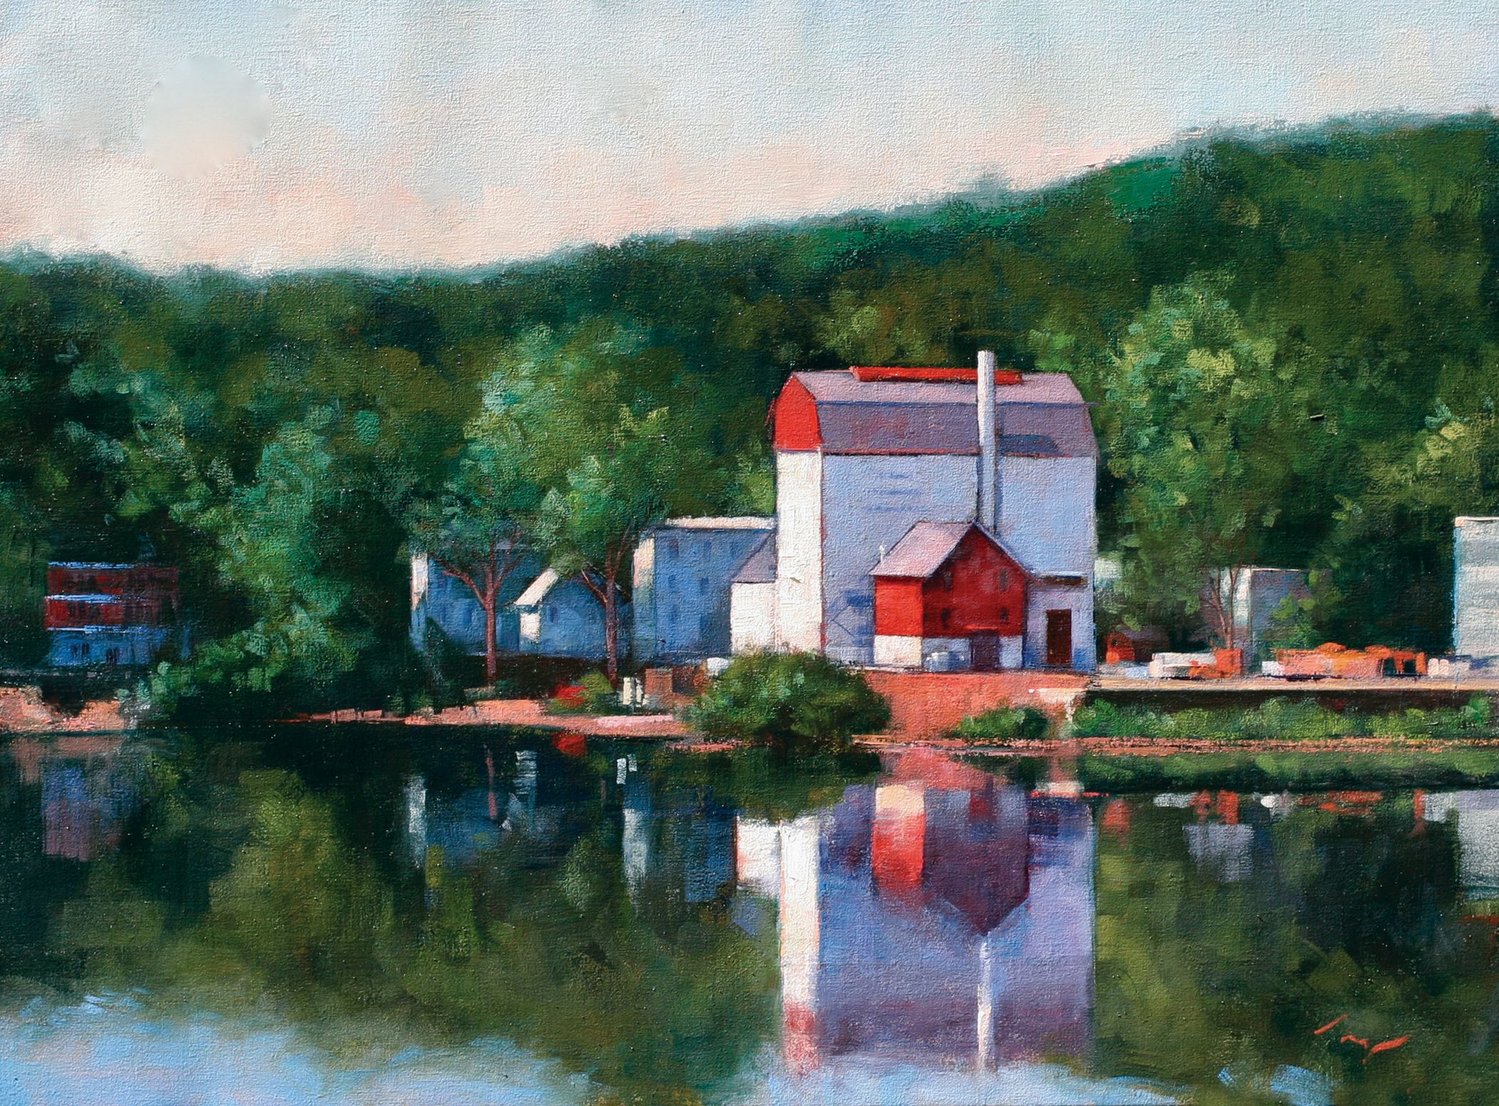 “Playhouse Reflections” is an oil painting by George Thompson.